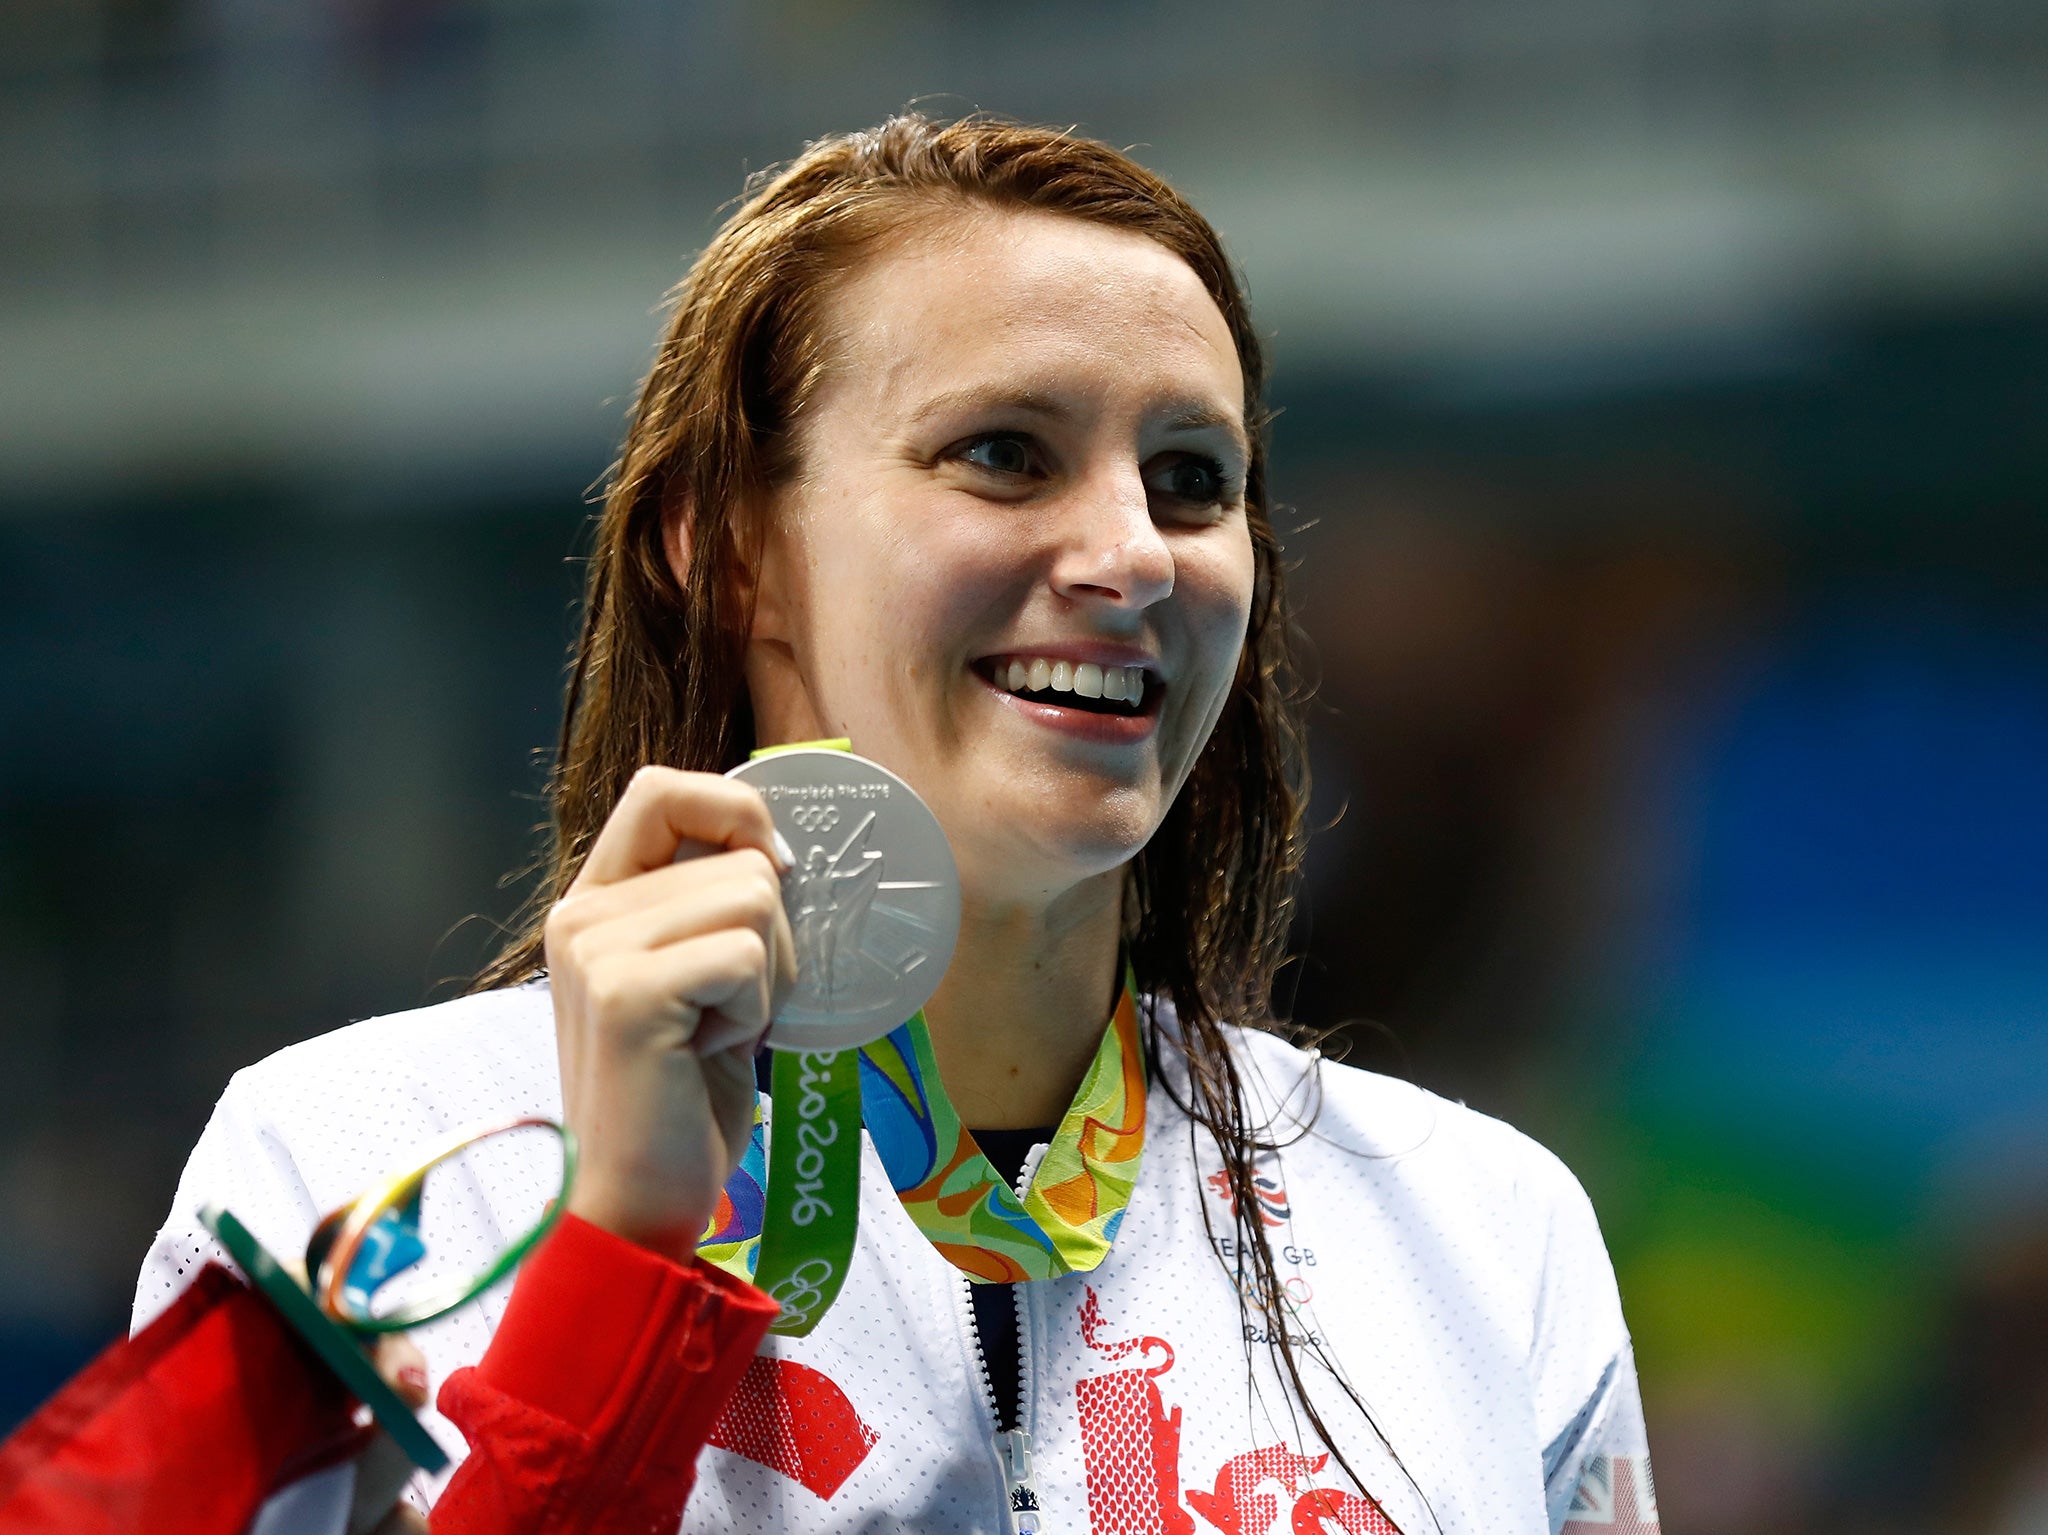 Carlin proudly shows off her silver medal